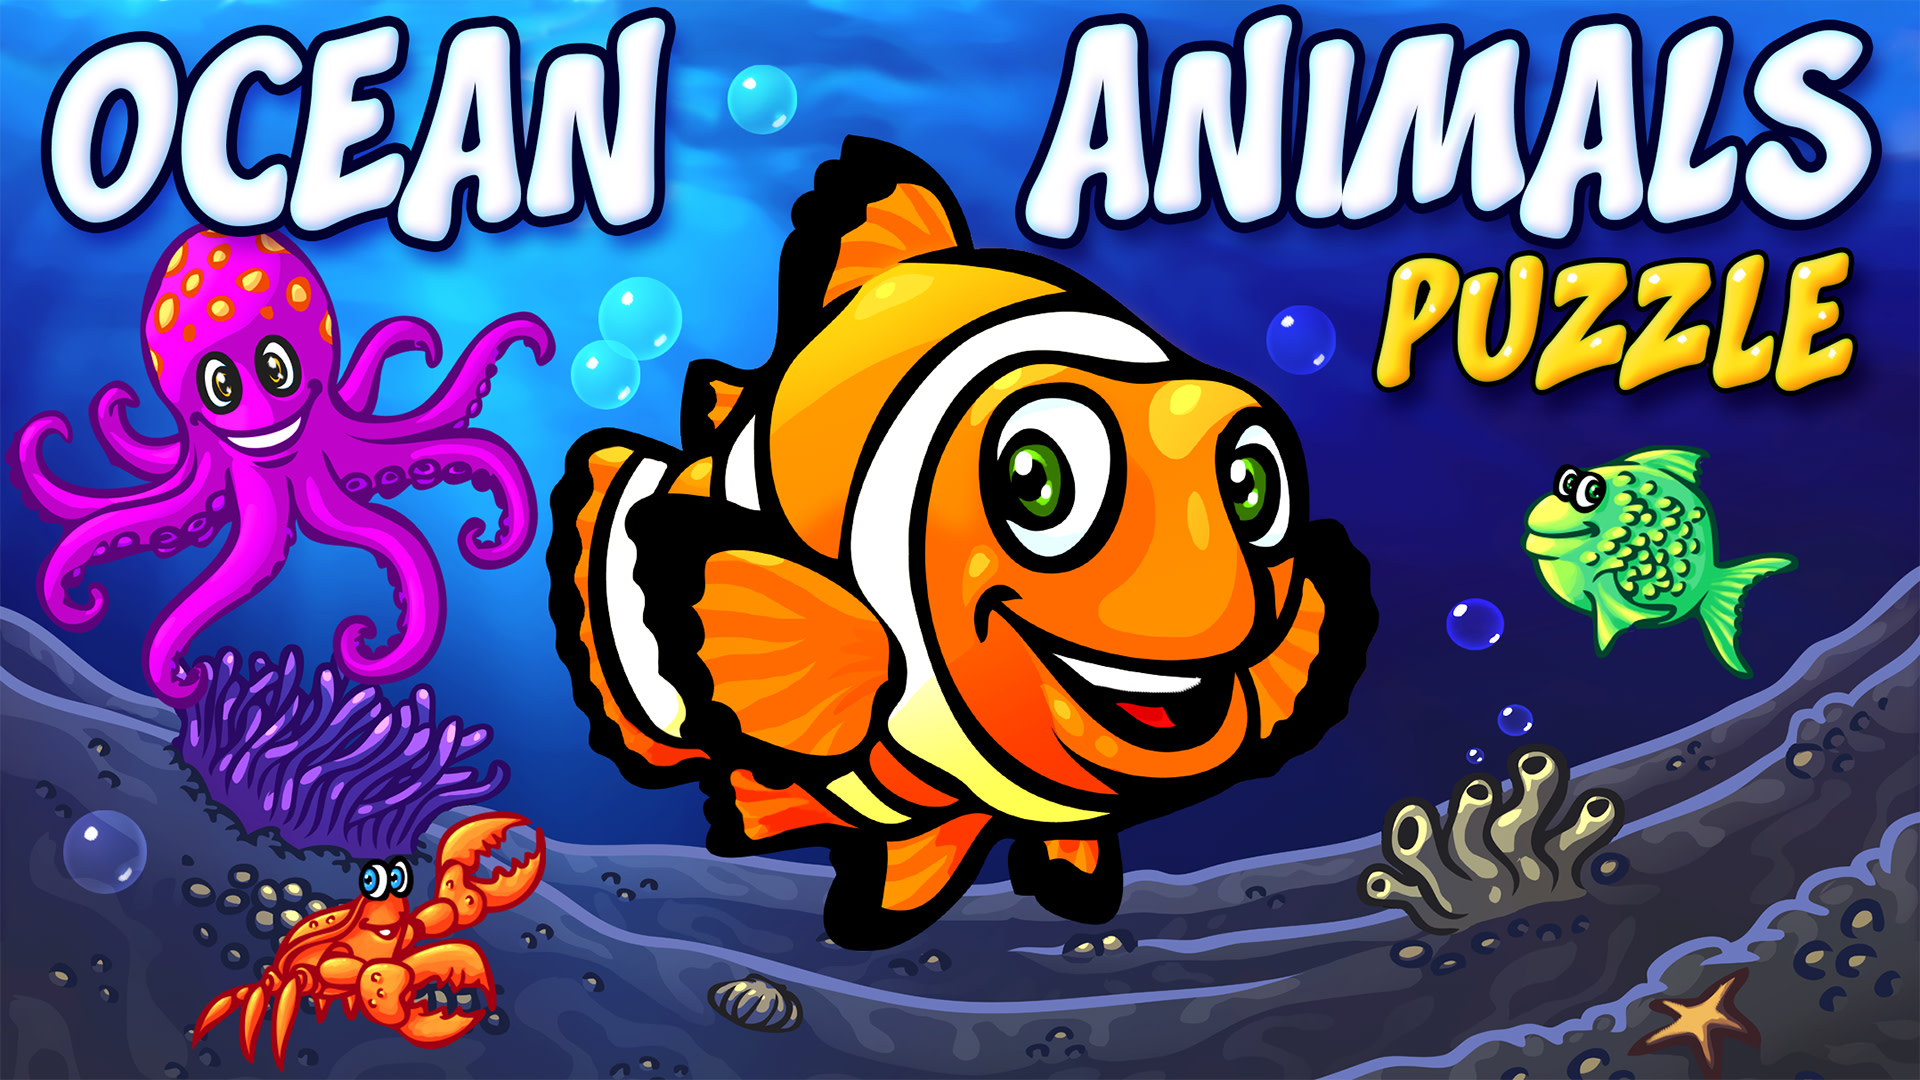 Ocean Animals Puzzle - Preschool Animal Learning Puzzles Game for Kids & Toddlers 1